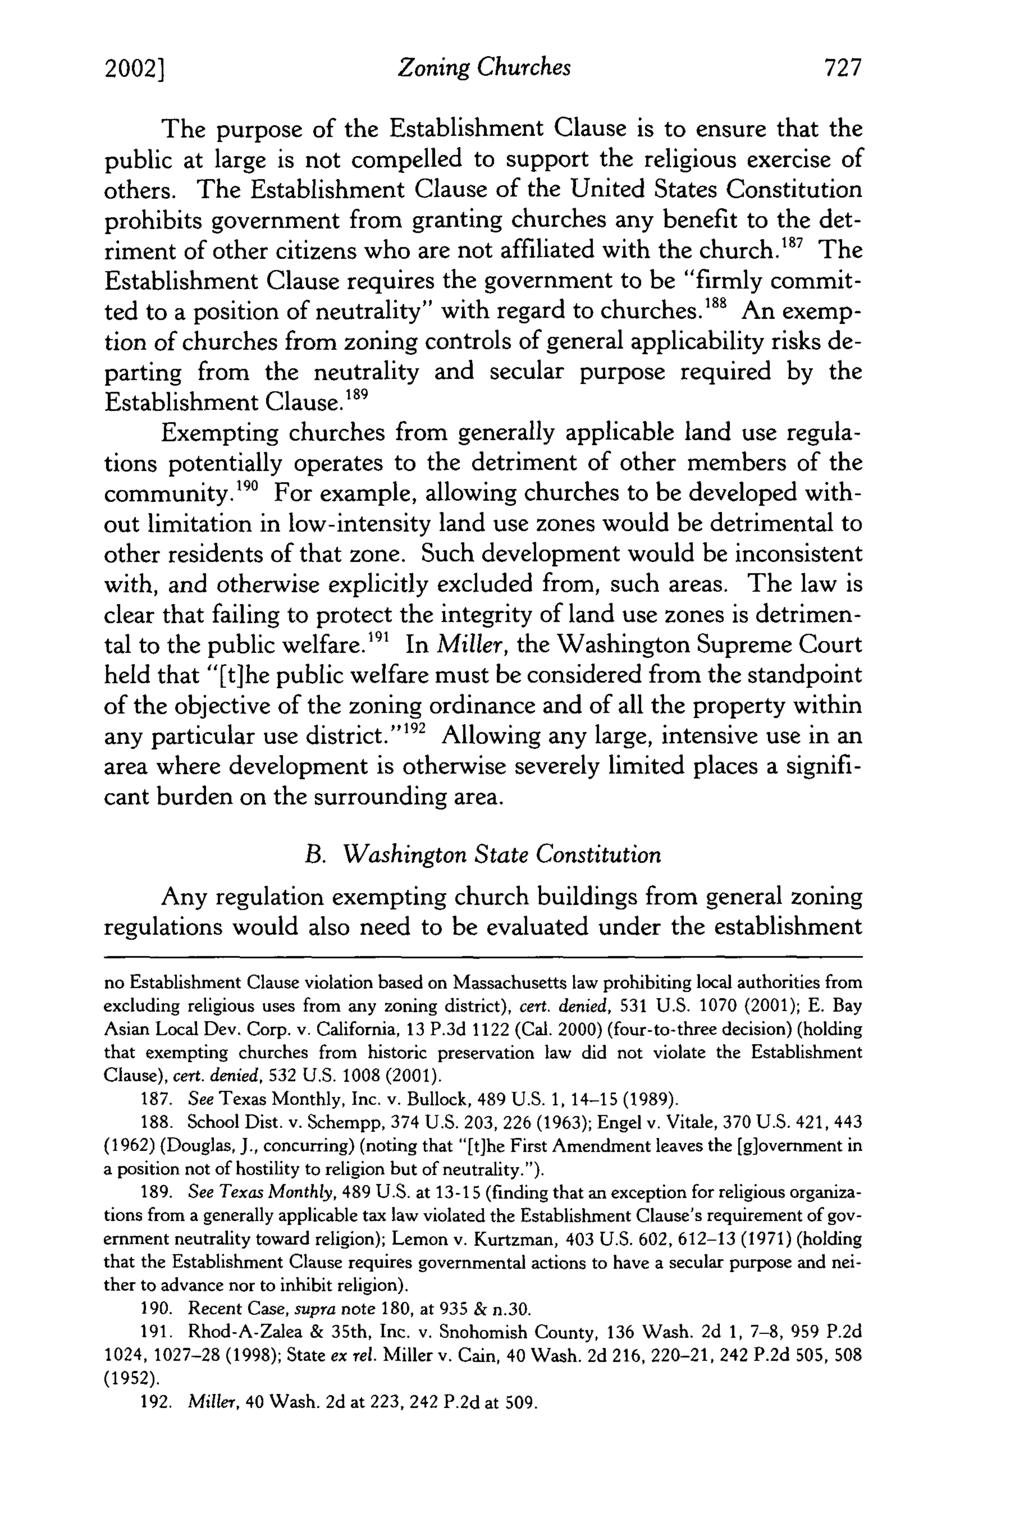 2002] Zoning Churches The purpose of the Establishment Clause is to ensure that the public at large is not compelled to support the religious exercise of others.